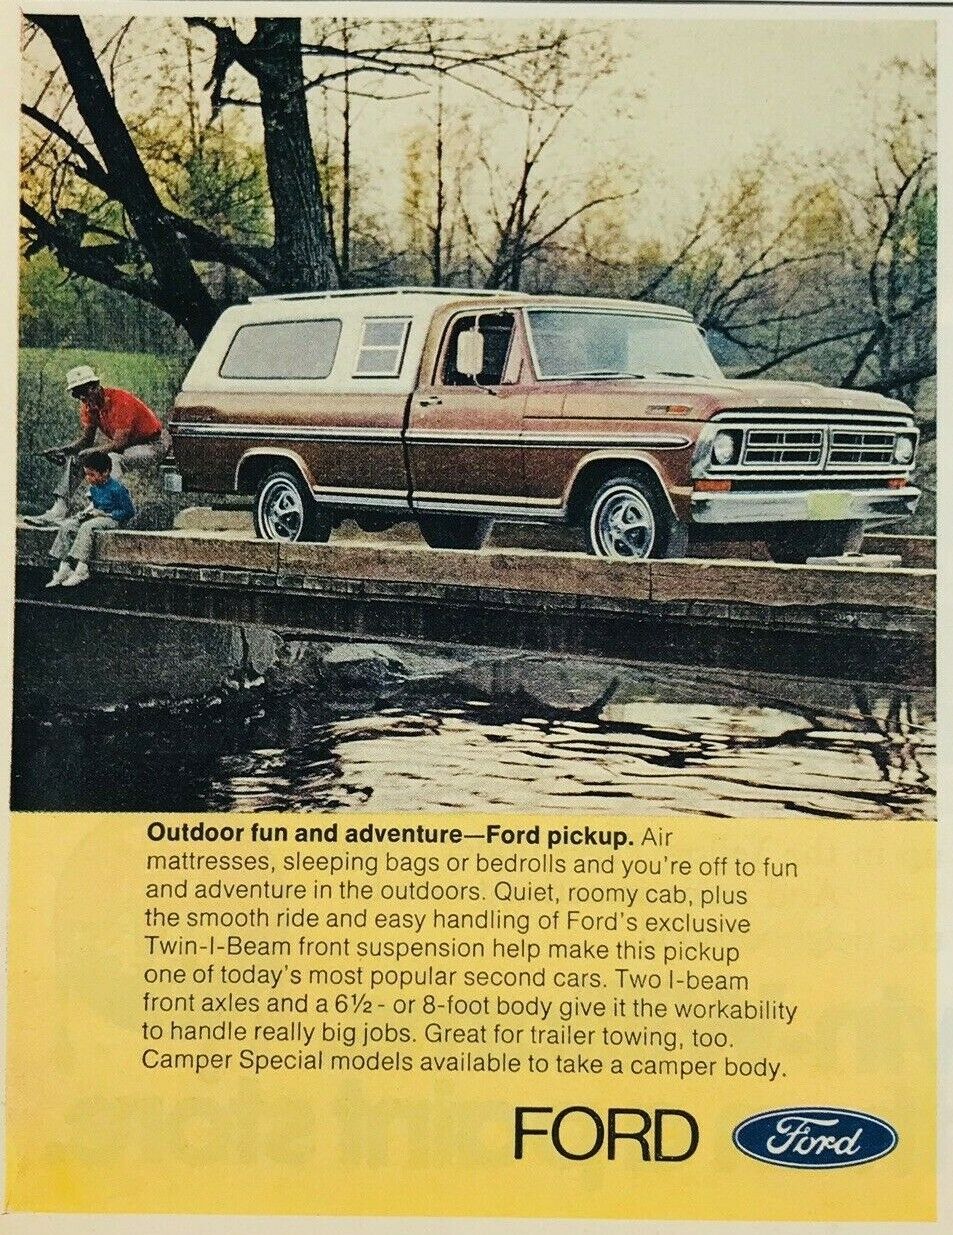 1972 Advertising Ford Pickup Outdoor Camper Body Truck Bed Fishing Print Ad